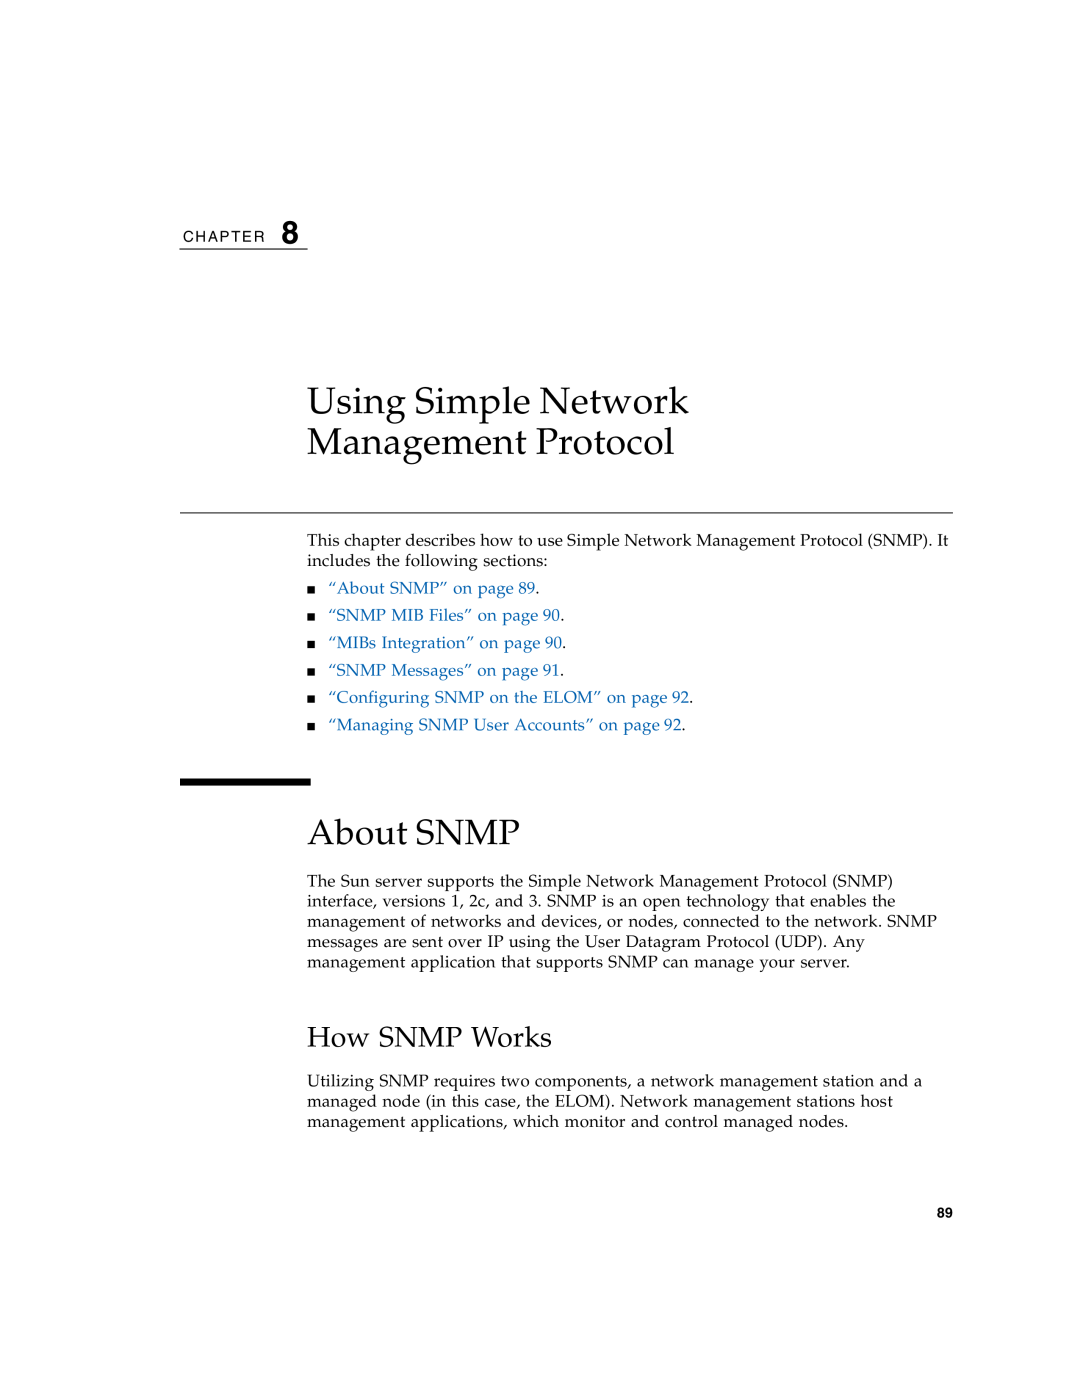 Sun Microsystems X4150 manual Using Simple Network Management Protocol, About SNMP, How SNMP Works 